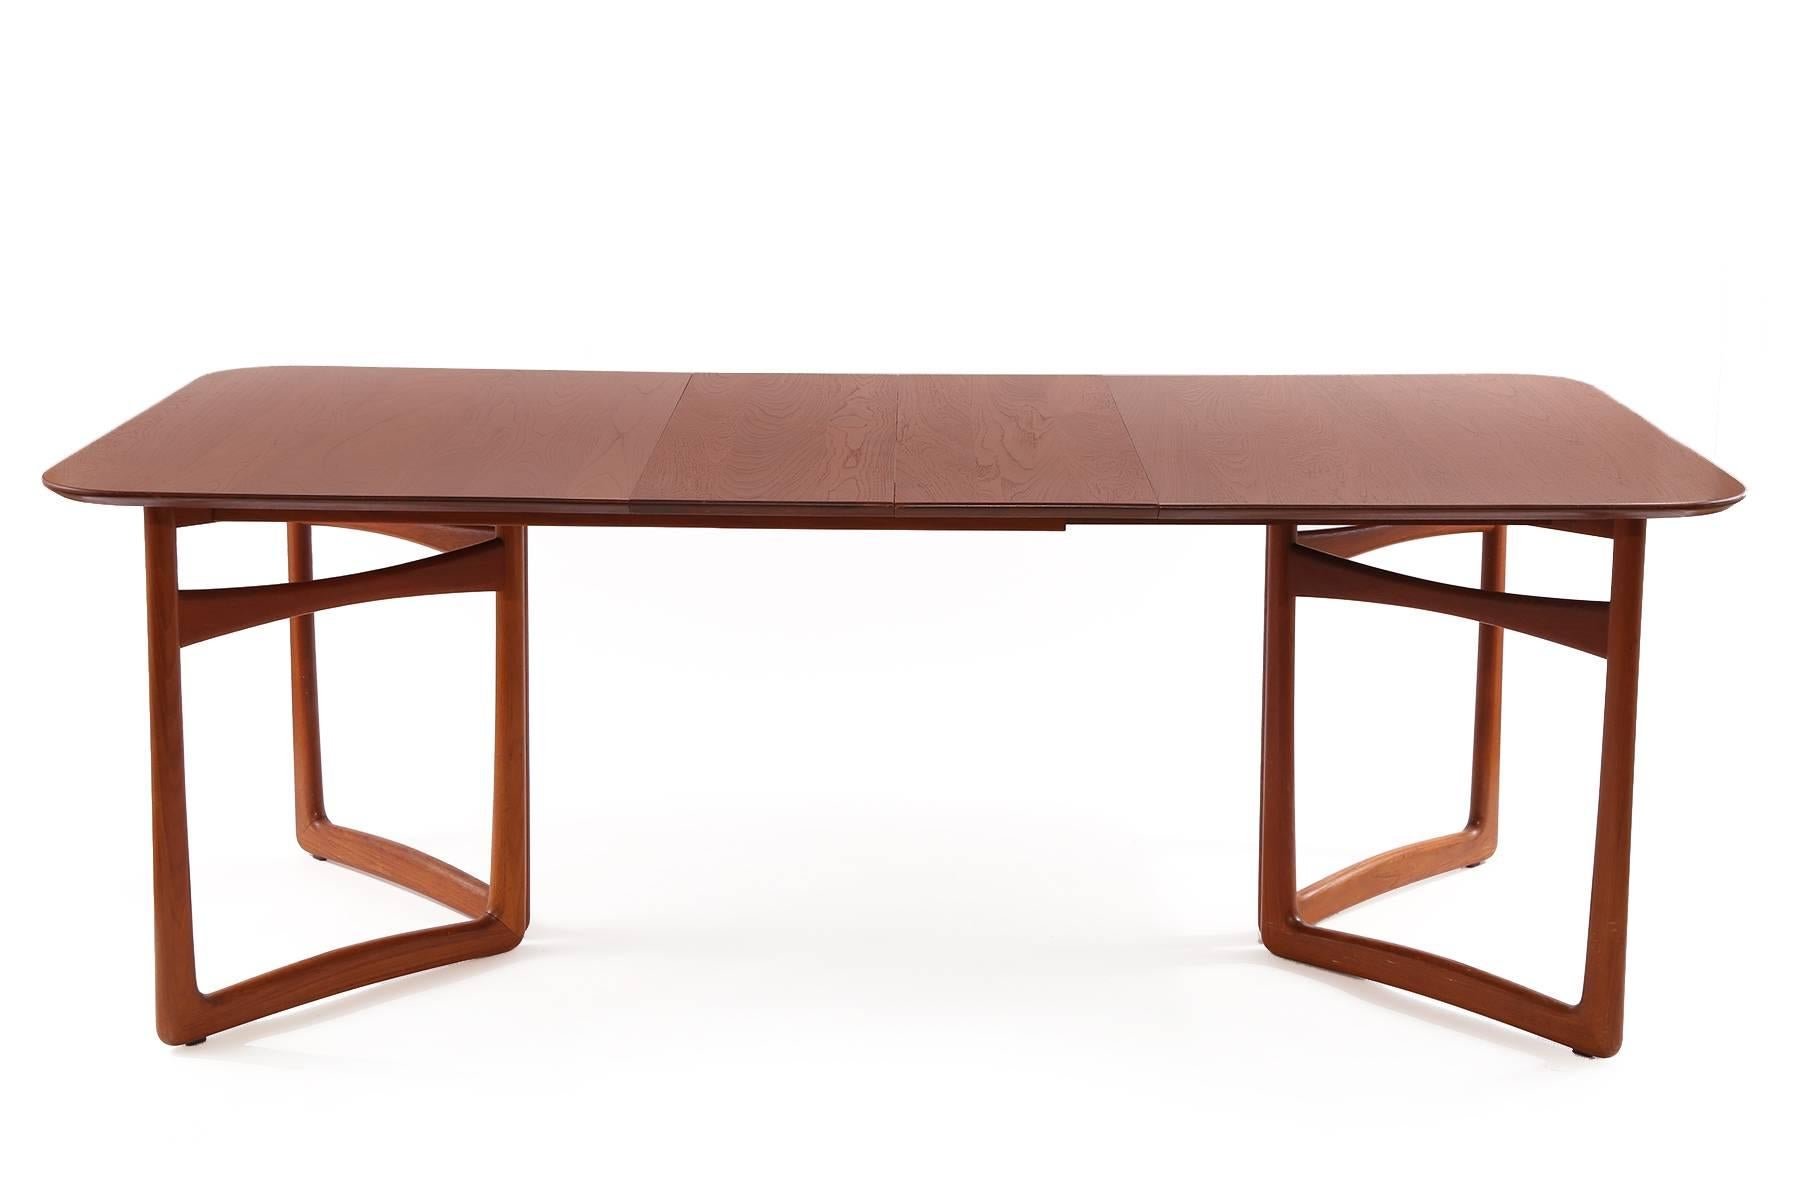 Solid teak and brass dining table by Peter Hvidt and Orla Molgaard Nielsen circa late 1950s. This all original example has sculptural solid teak legs and stretchers with patinated brass accents. It has a beautifully grained solid teak top with two